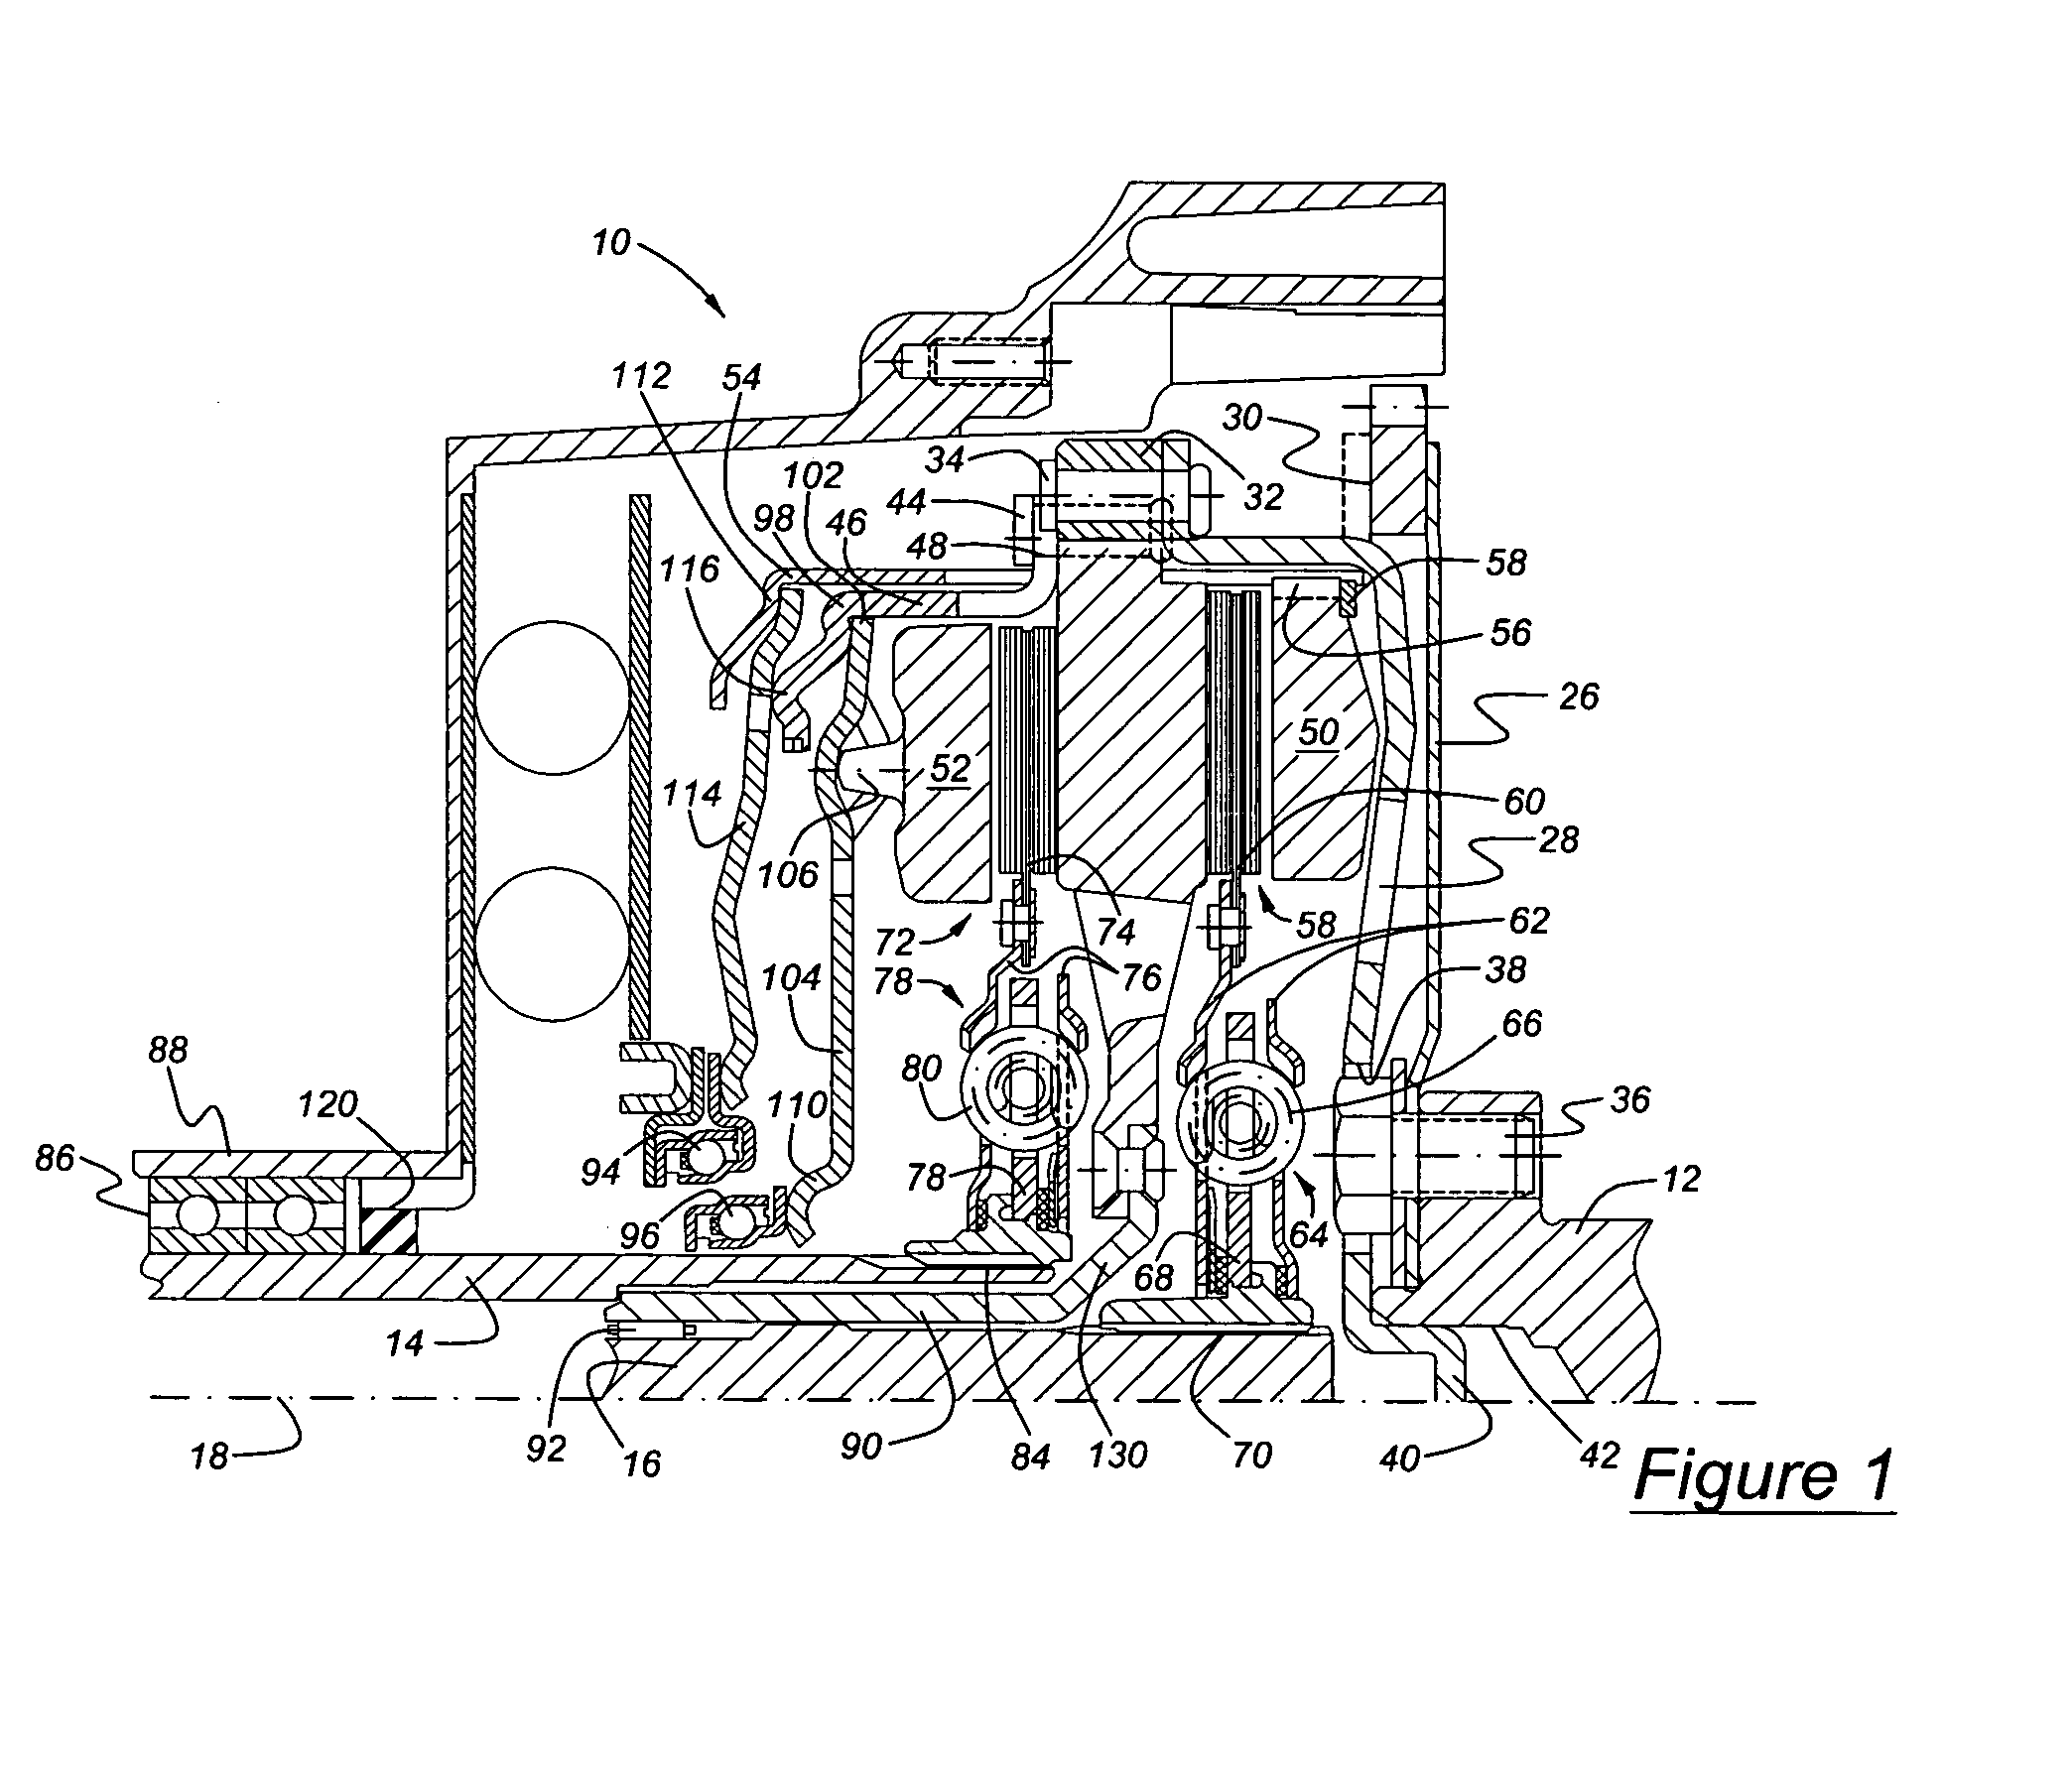 Dual clutch assembly for a motor vehicle powertrain